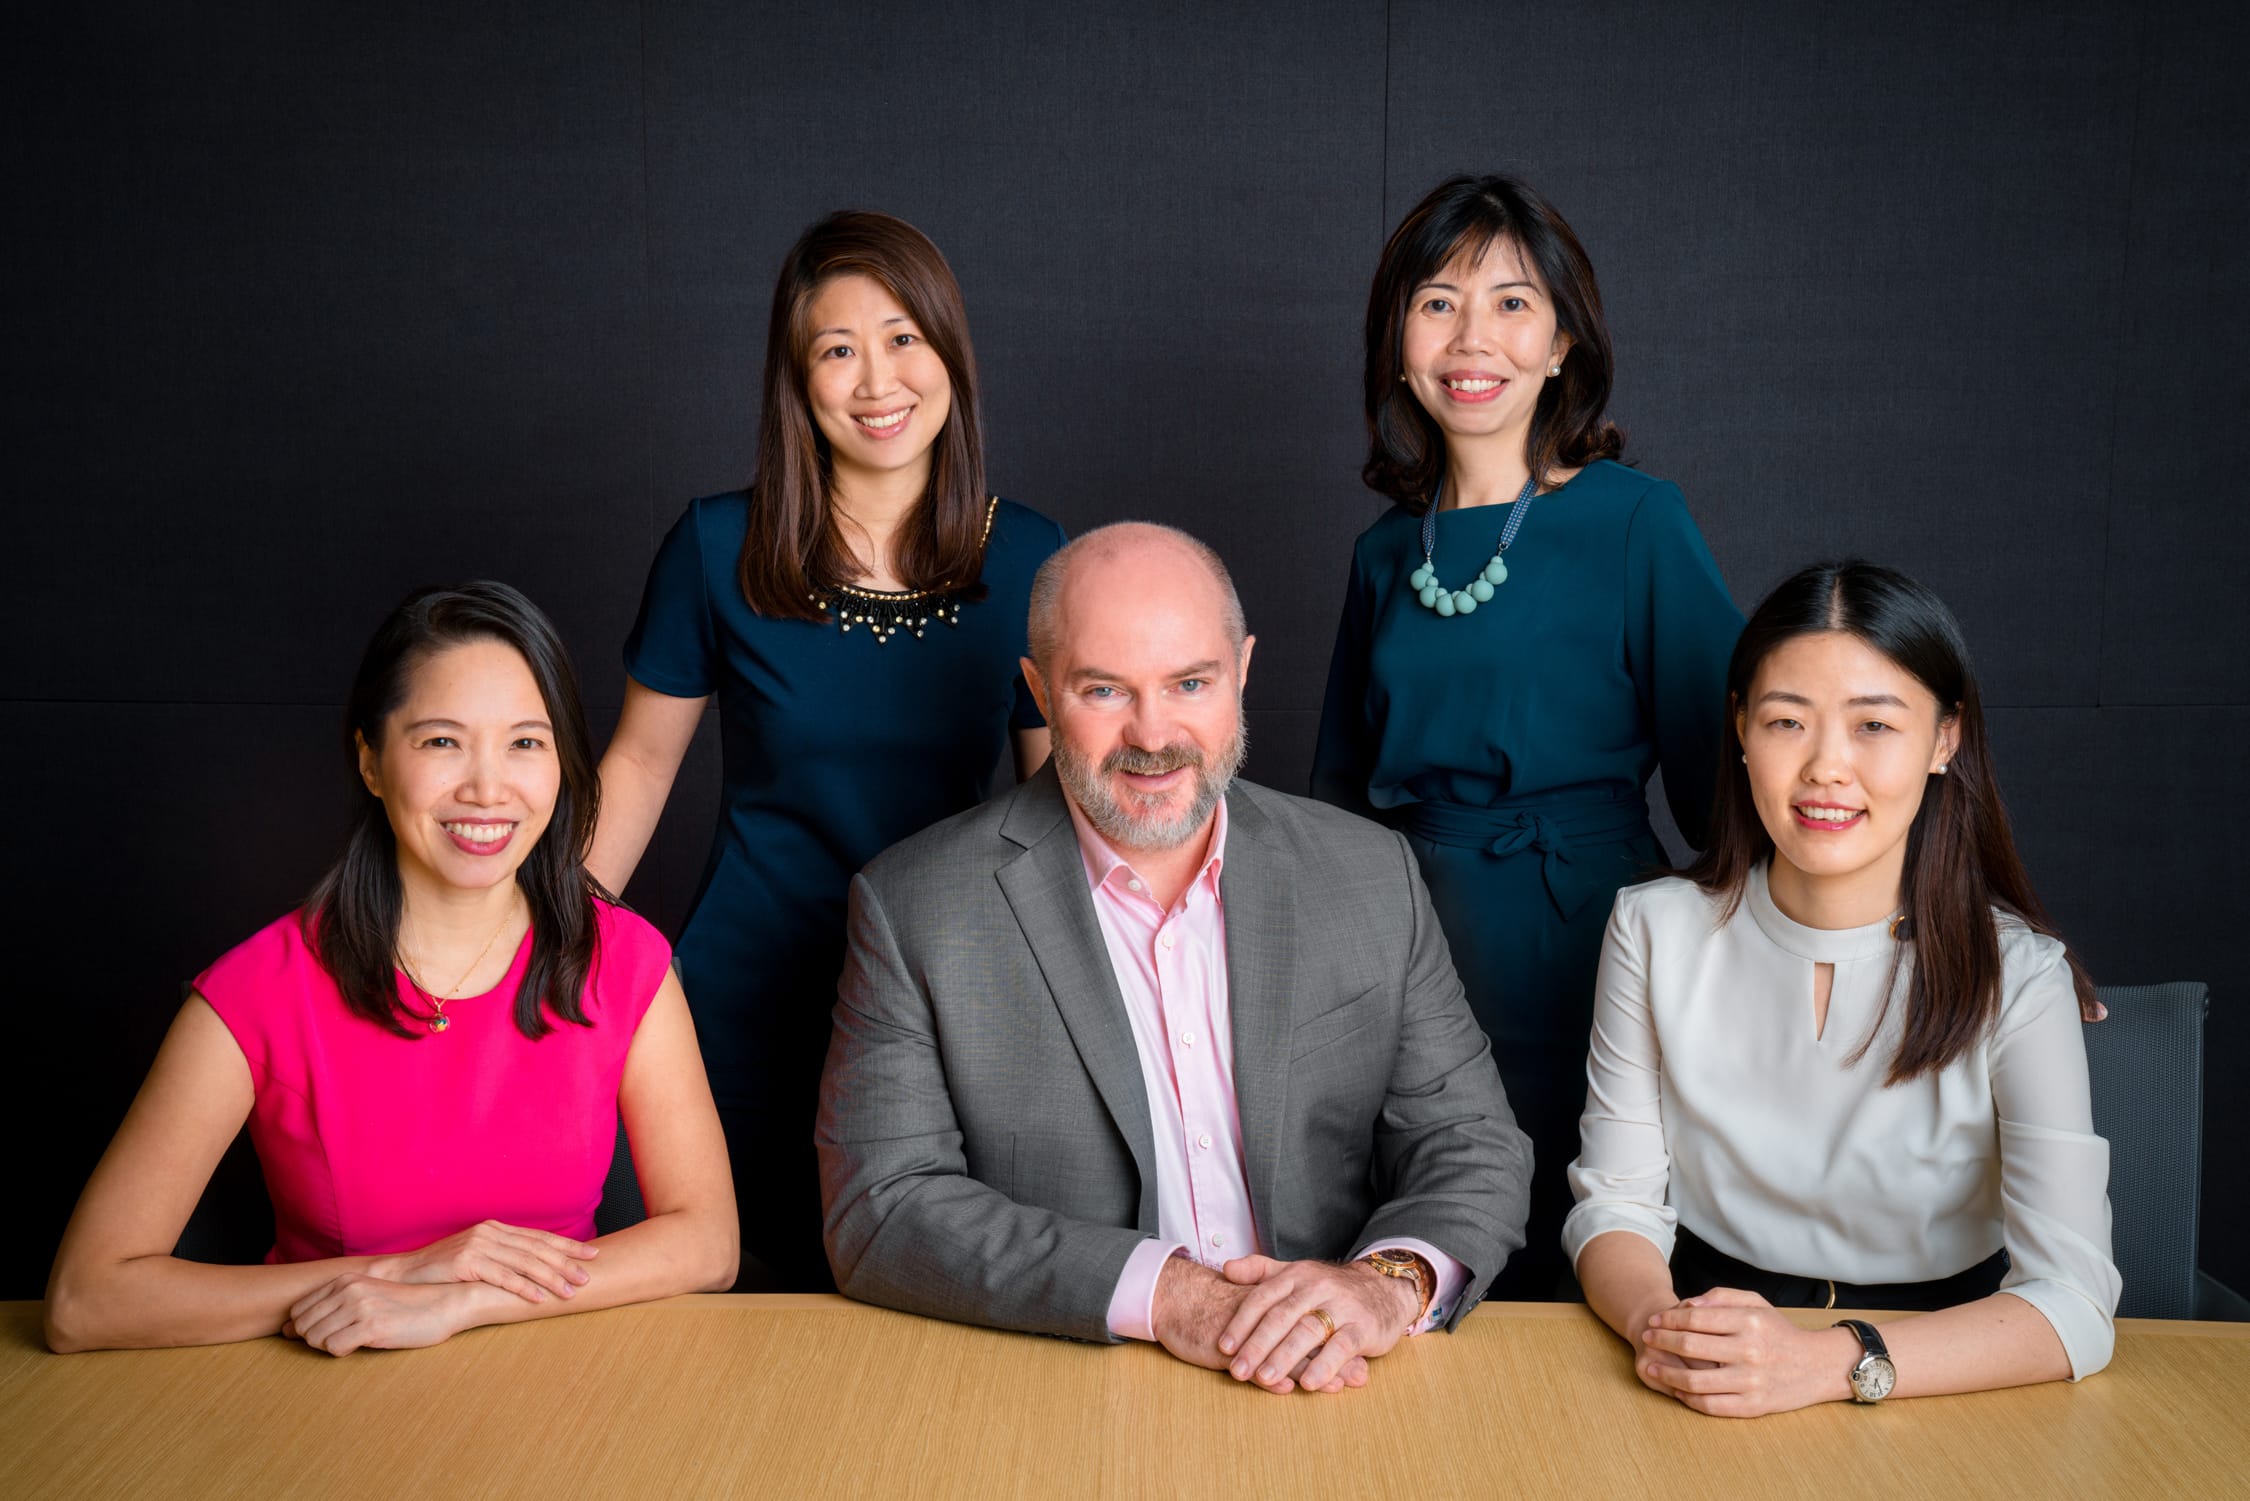 A group of male and female professionals smiling and sitting down at a desk posing for a corporate photoshoot in Singapore, White Room Studio